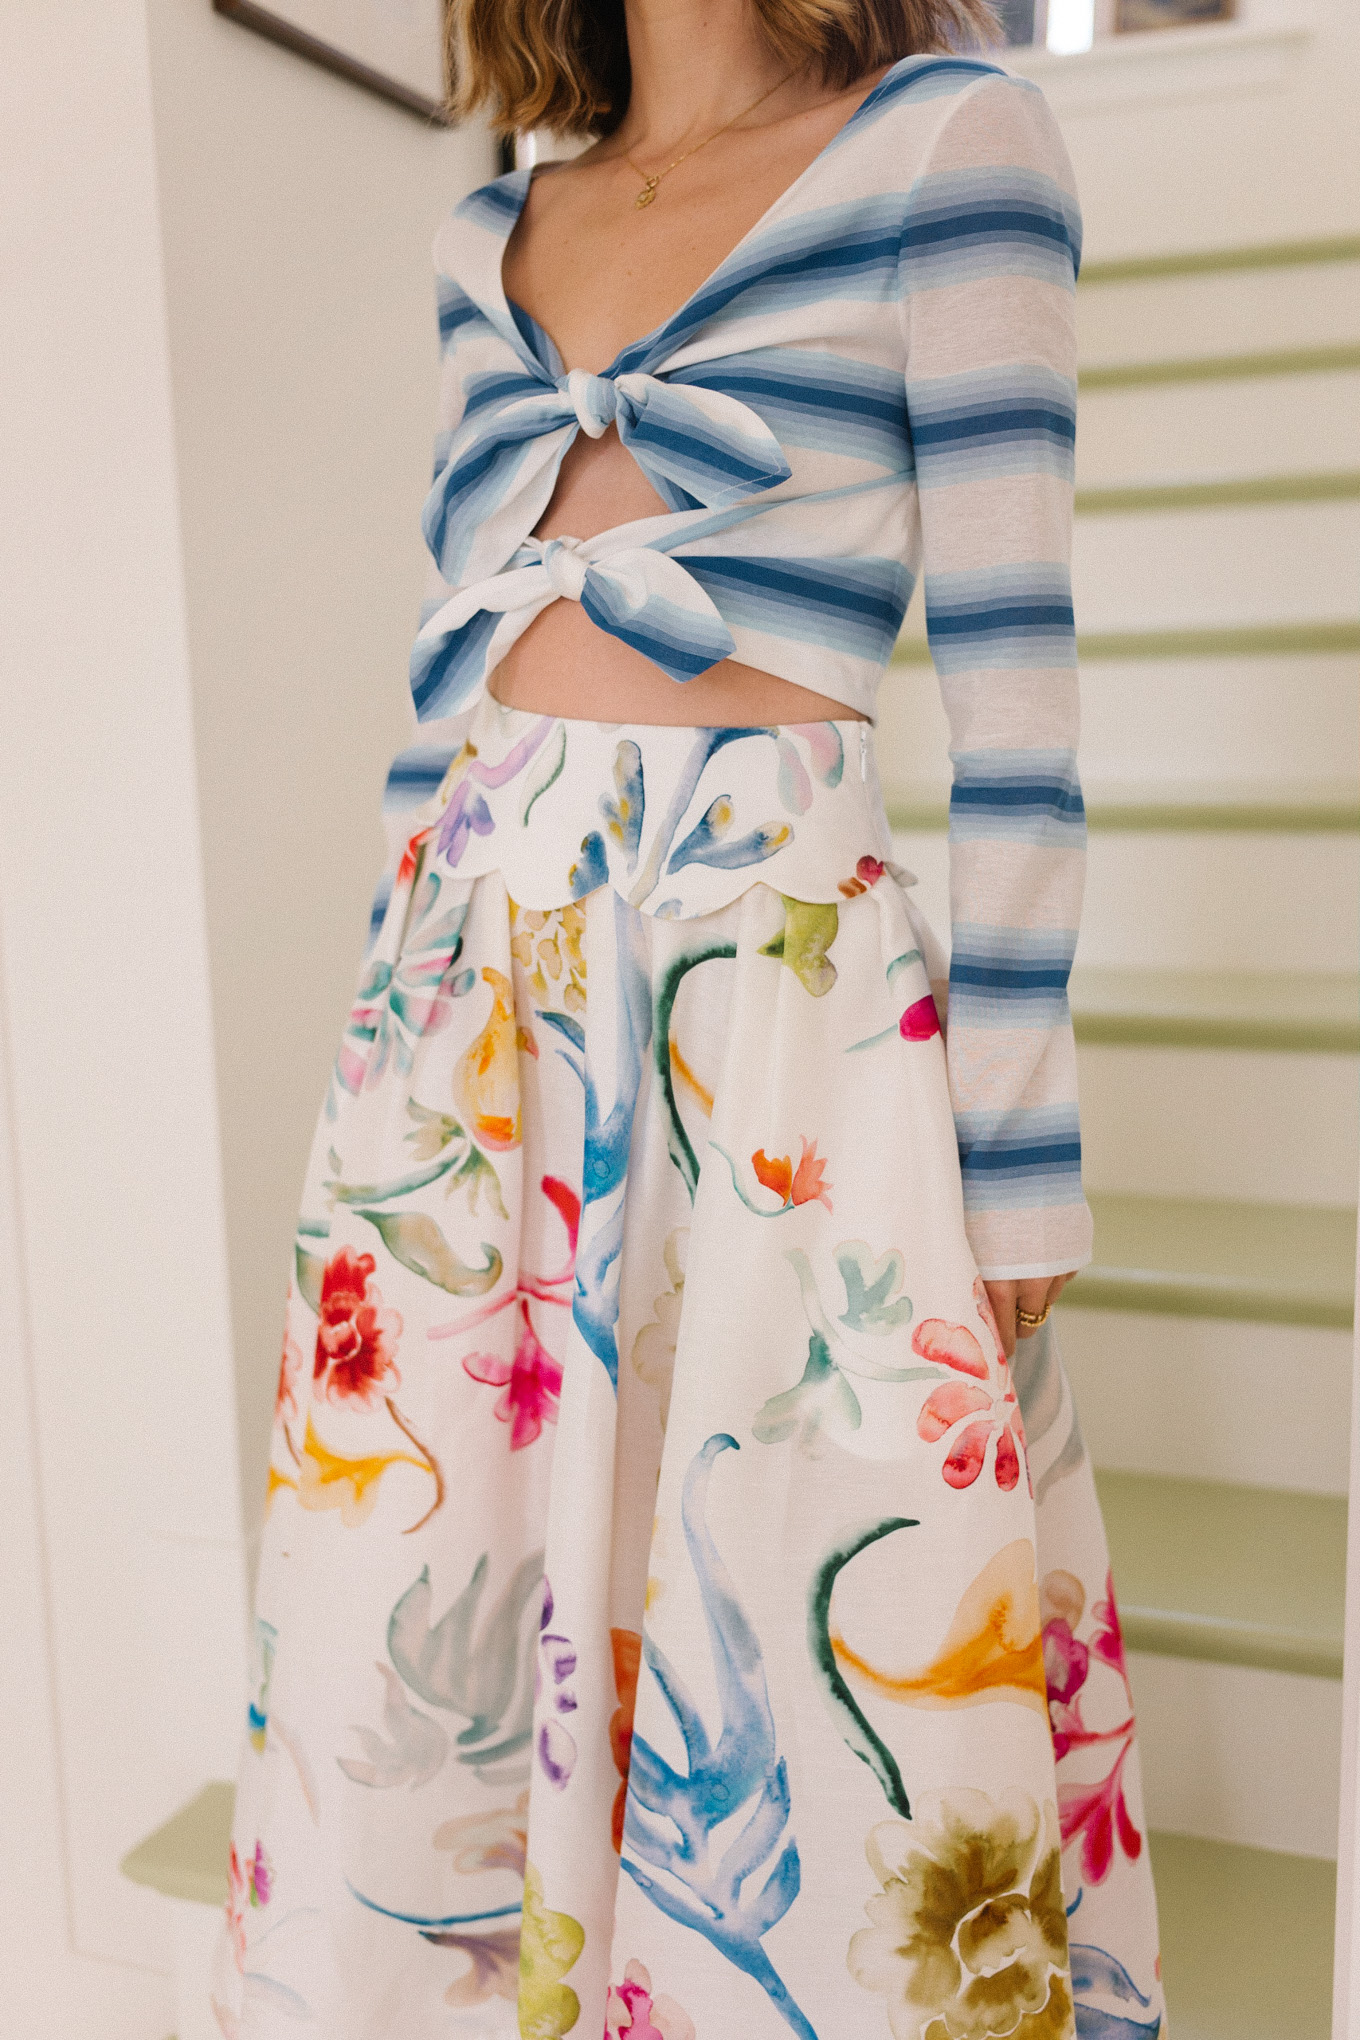 blue white striped top floral skirt